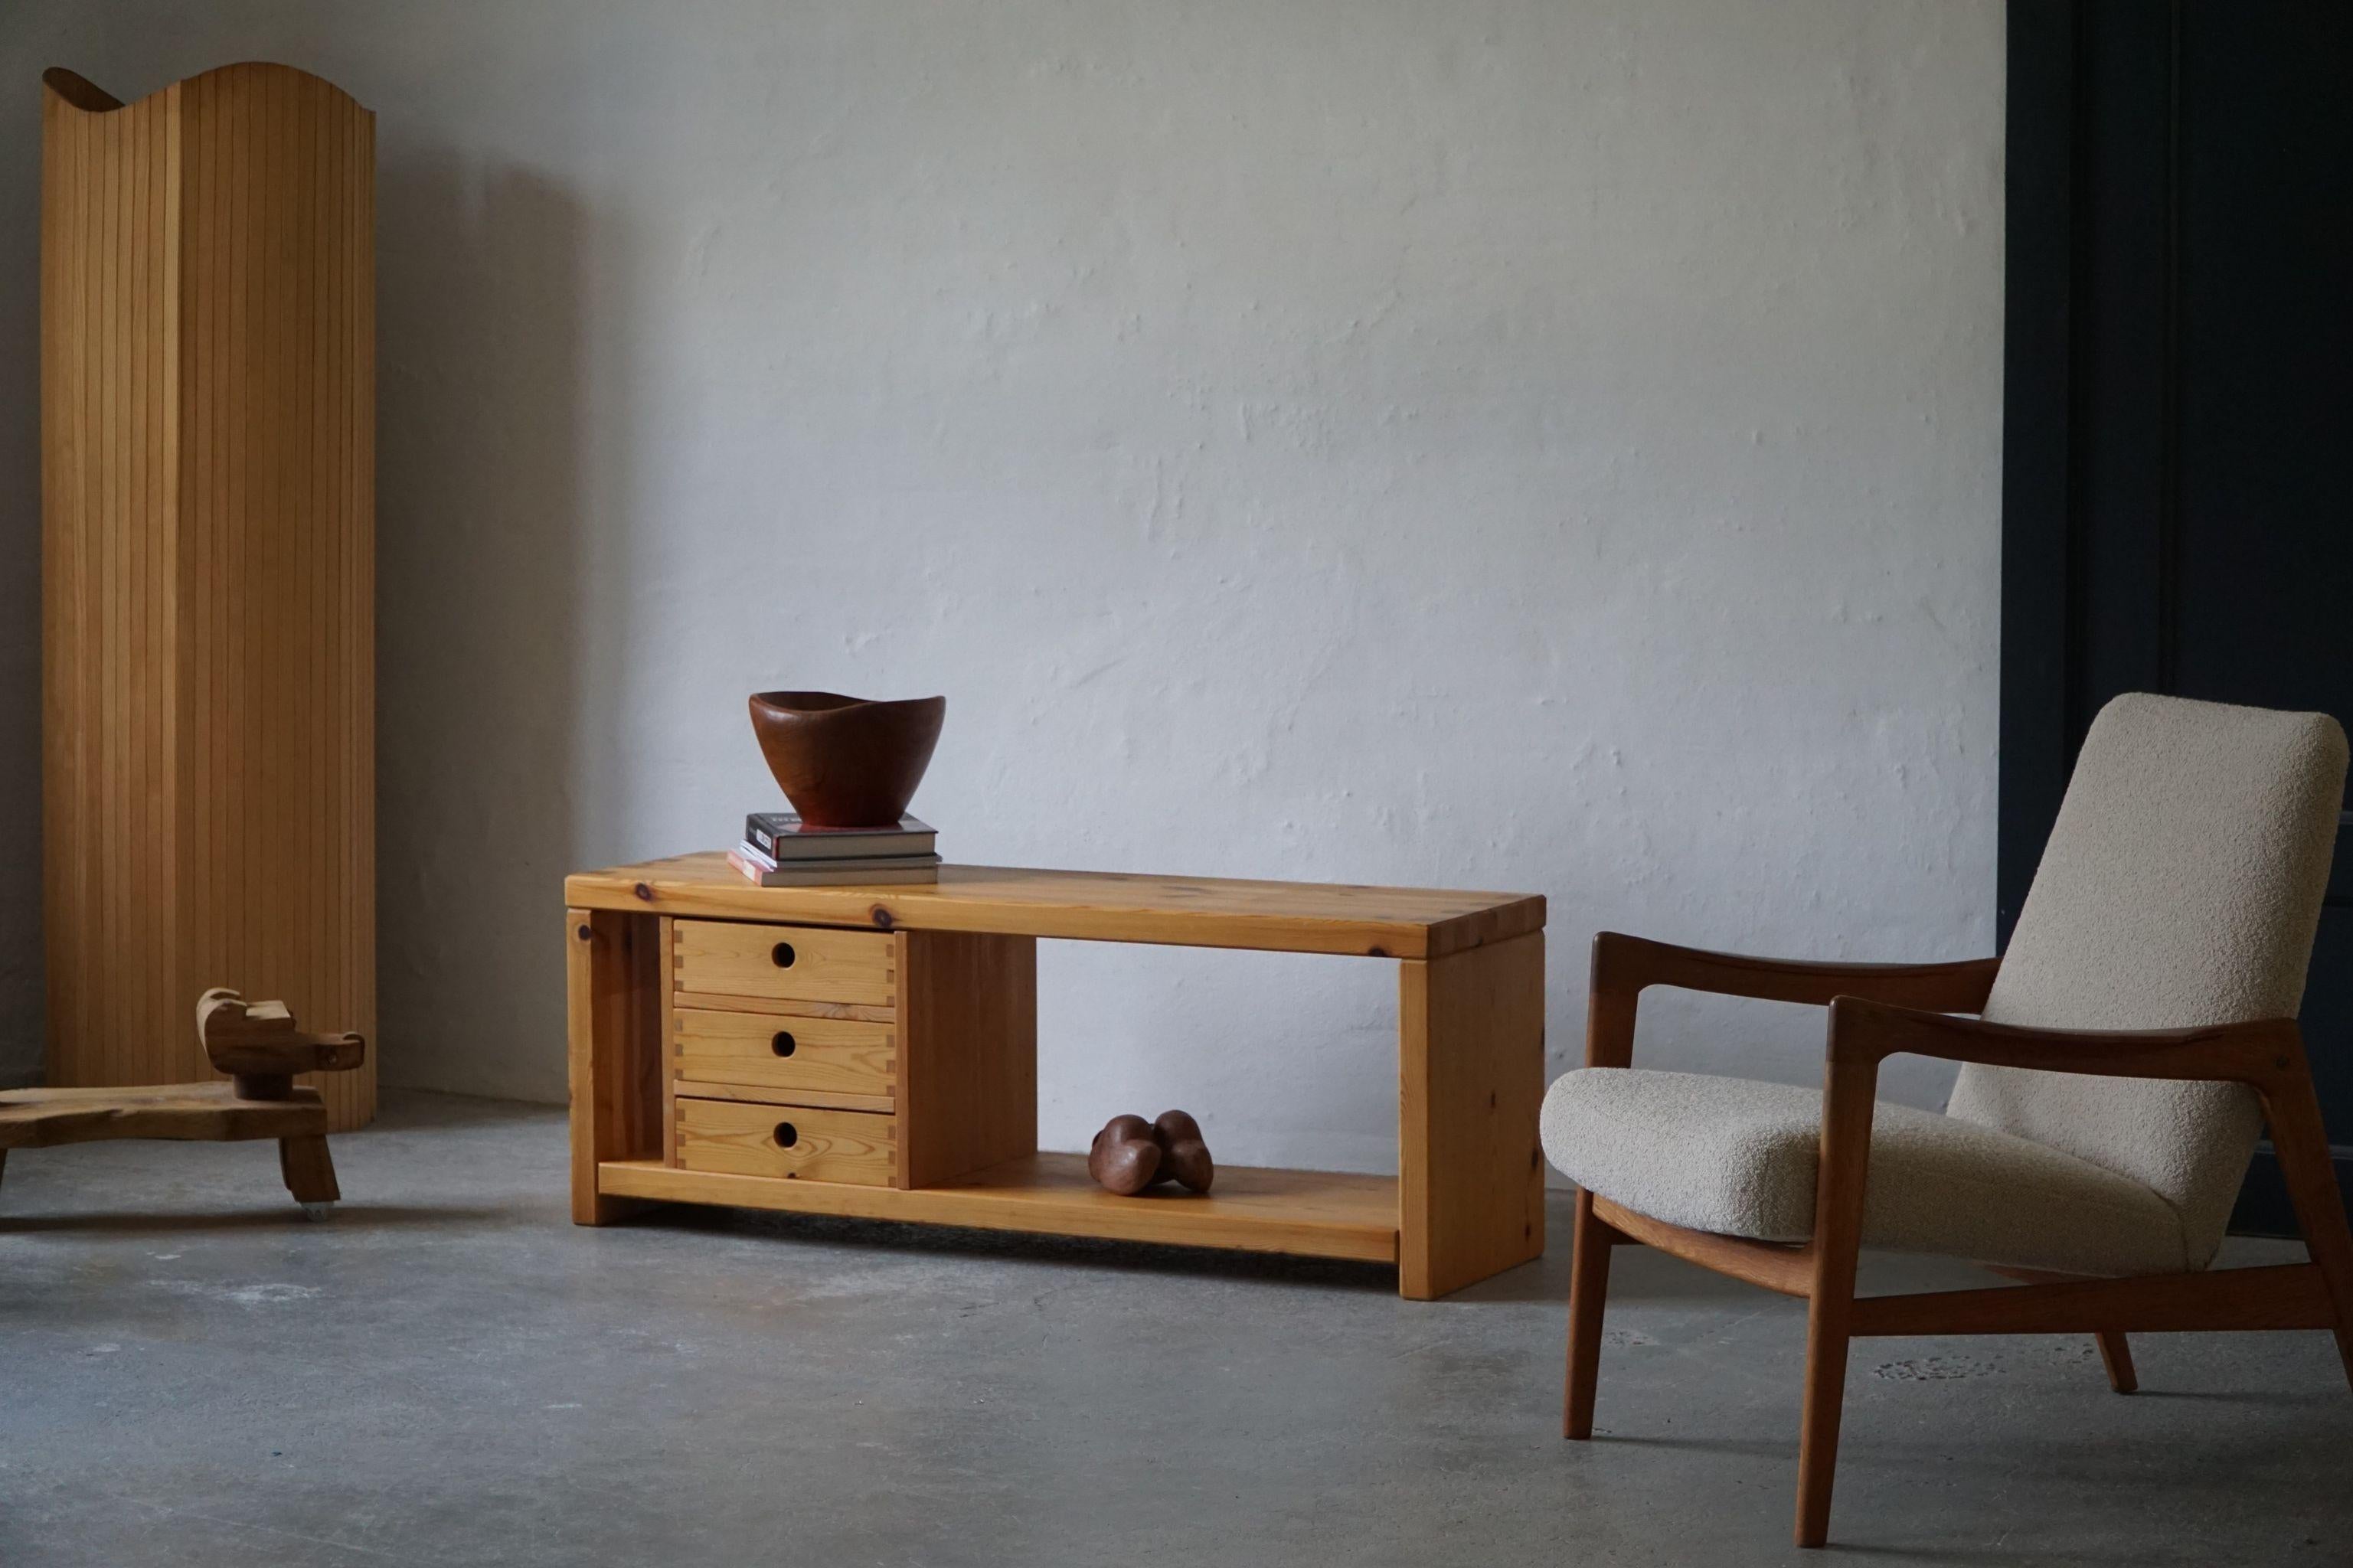 Danish brutalist console table with three drawers in solid pine, made by Aksel Kjersgaard in 1970s. Stamped.

It can also be used as a bench. 

A great object for the modern interior. A warm colour and patina that pair well with the minimalist